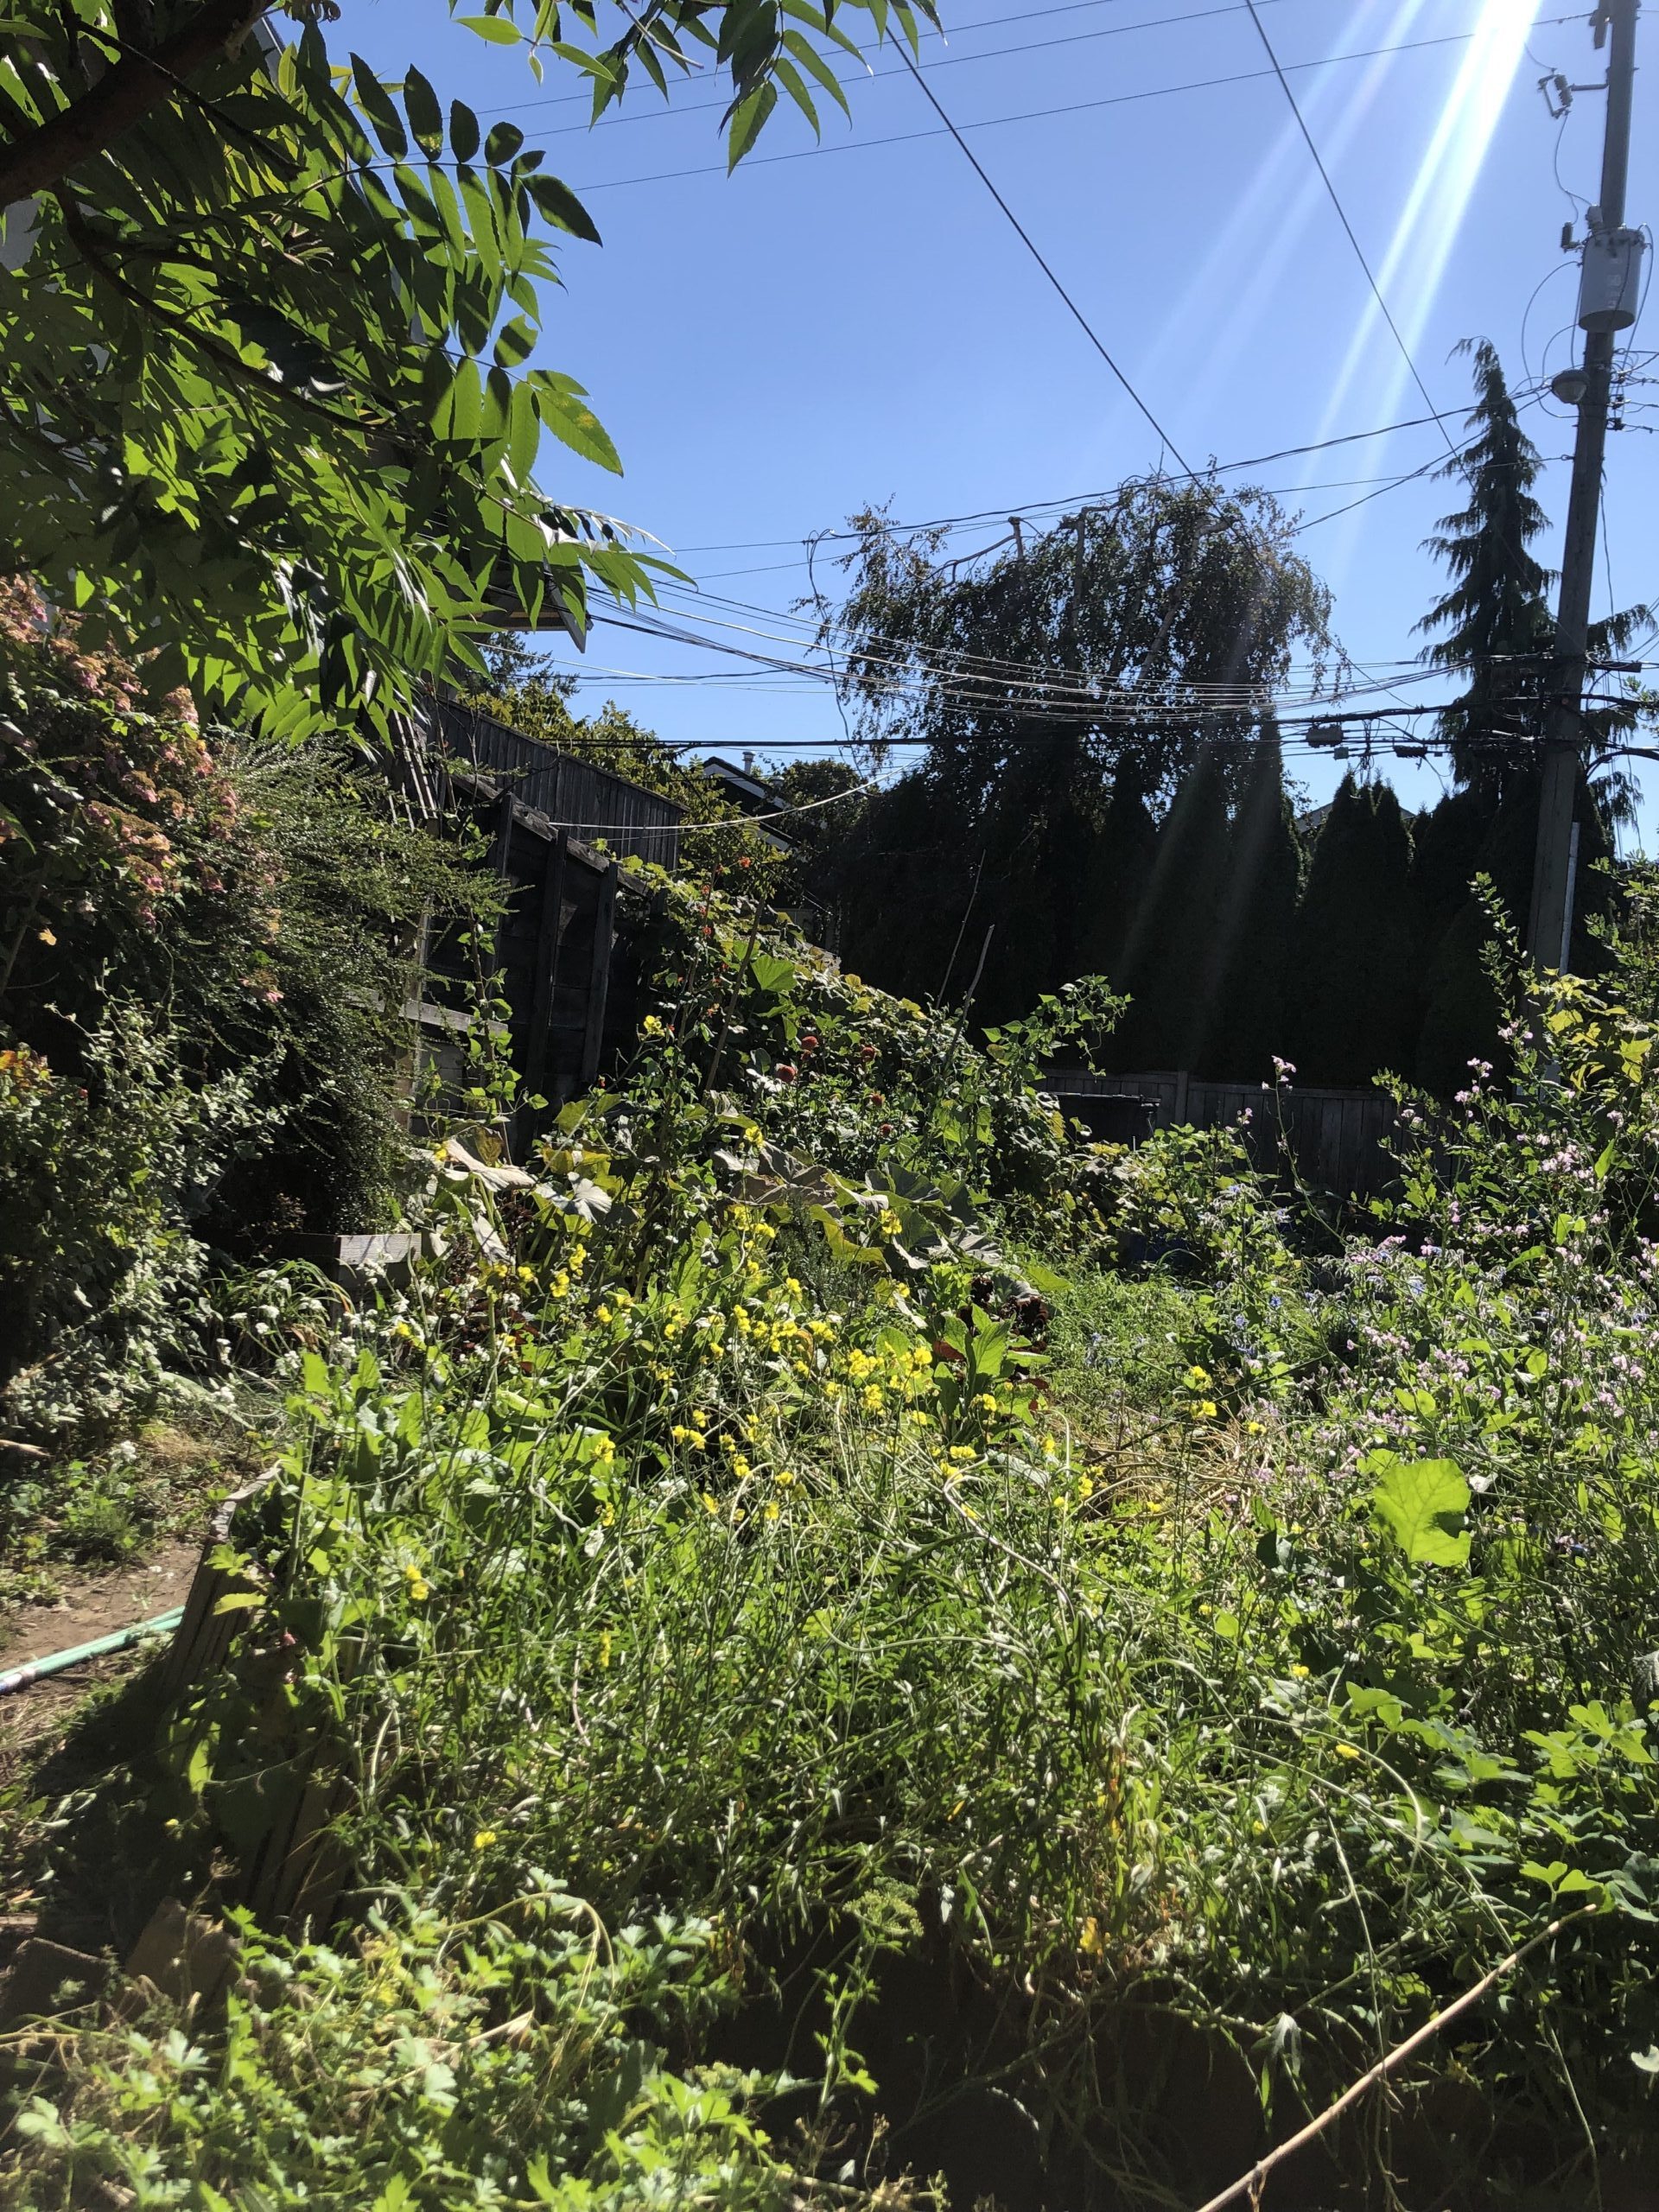 A wild and tangled garden with a blu sky on a sunny day. Powerlines are overhead, along with the leaved from a sumac tree. In the foregrounds are arugula, rashies, and marigolds which have all gone to seed.